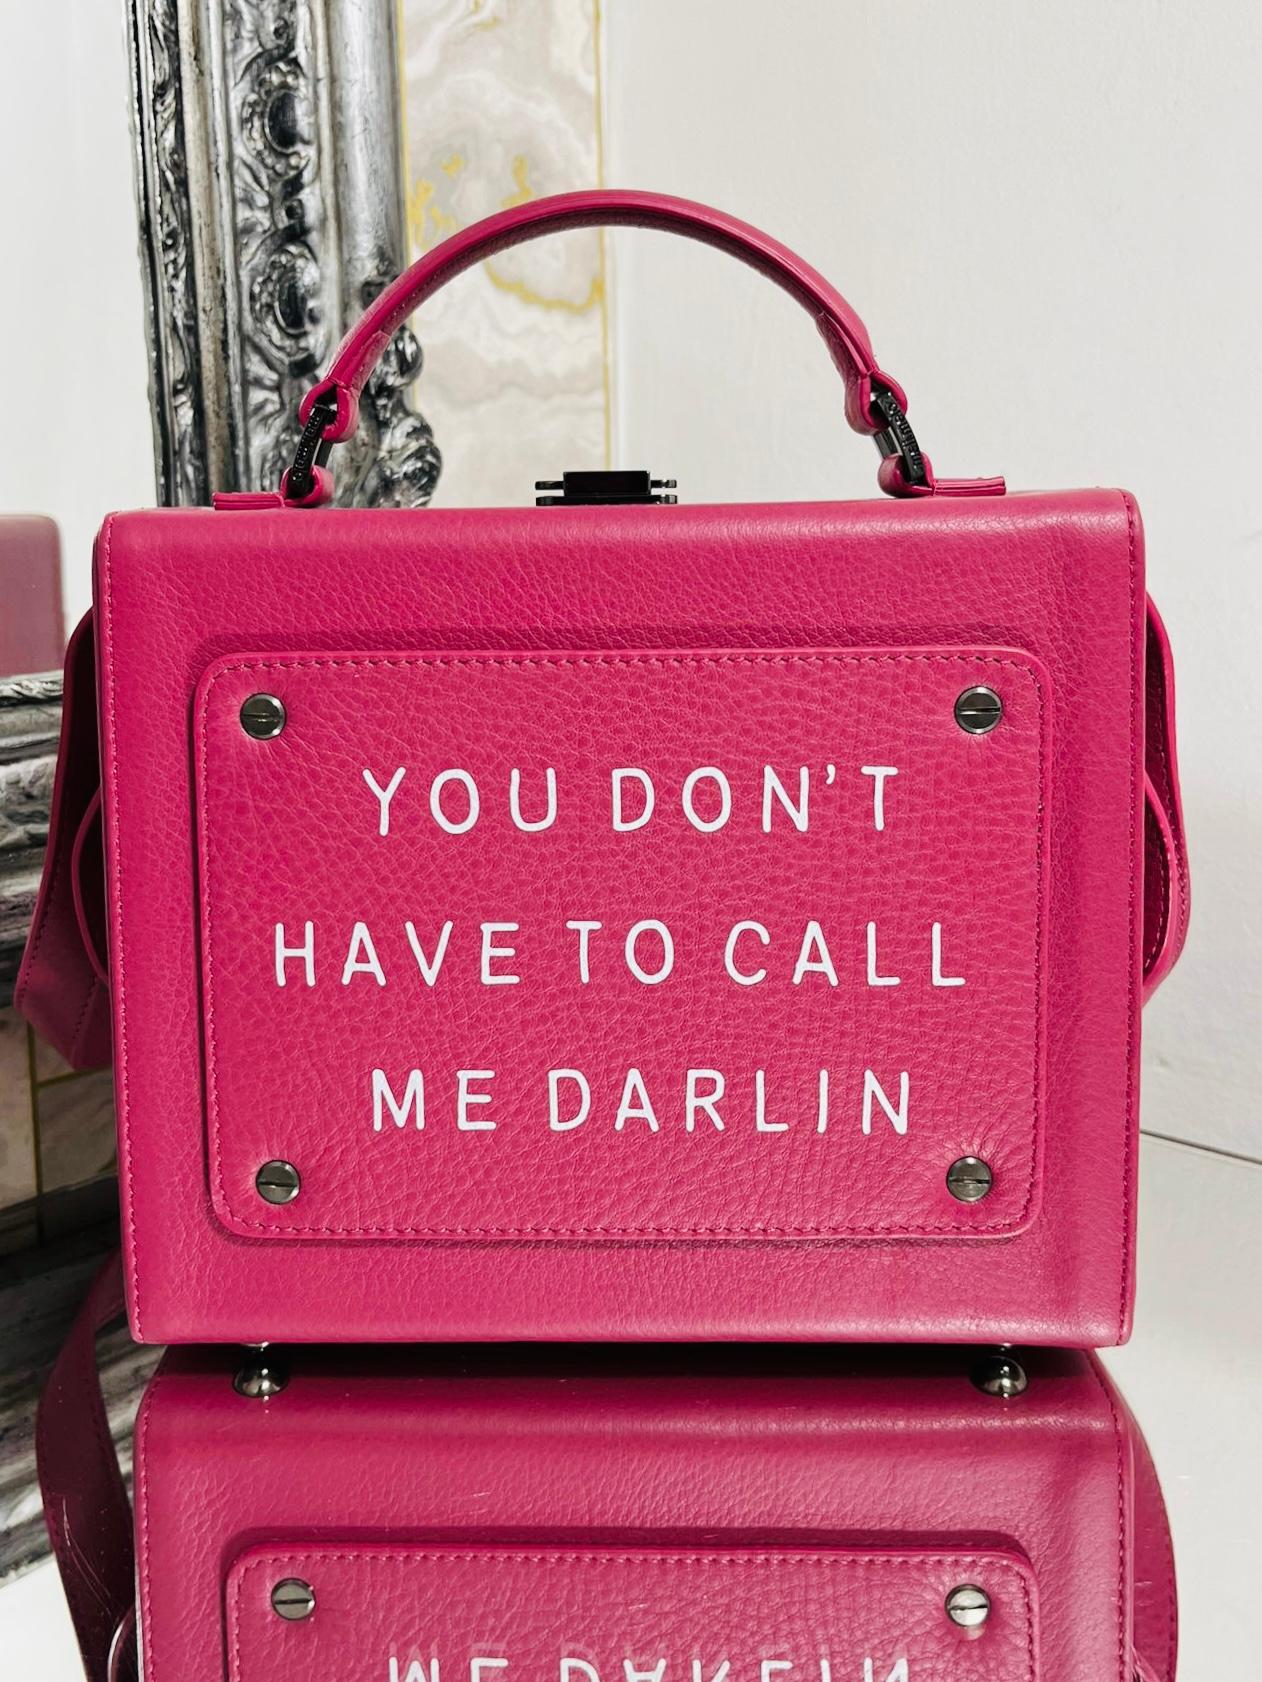 Meli Melo Leather Art Bag

Pink box case leather bag form the 'Art Collection' collaboration with Melissa Del Bono,

Frederica Fanari and Oliva Steele. With wording 'You Don't Have To Call Me Darling'.

Carry top handle and removable crossbody